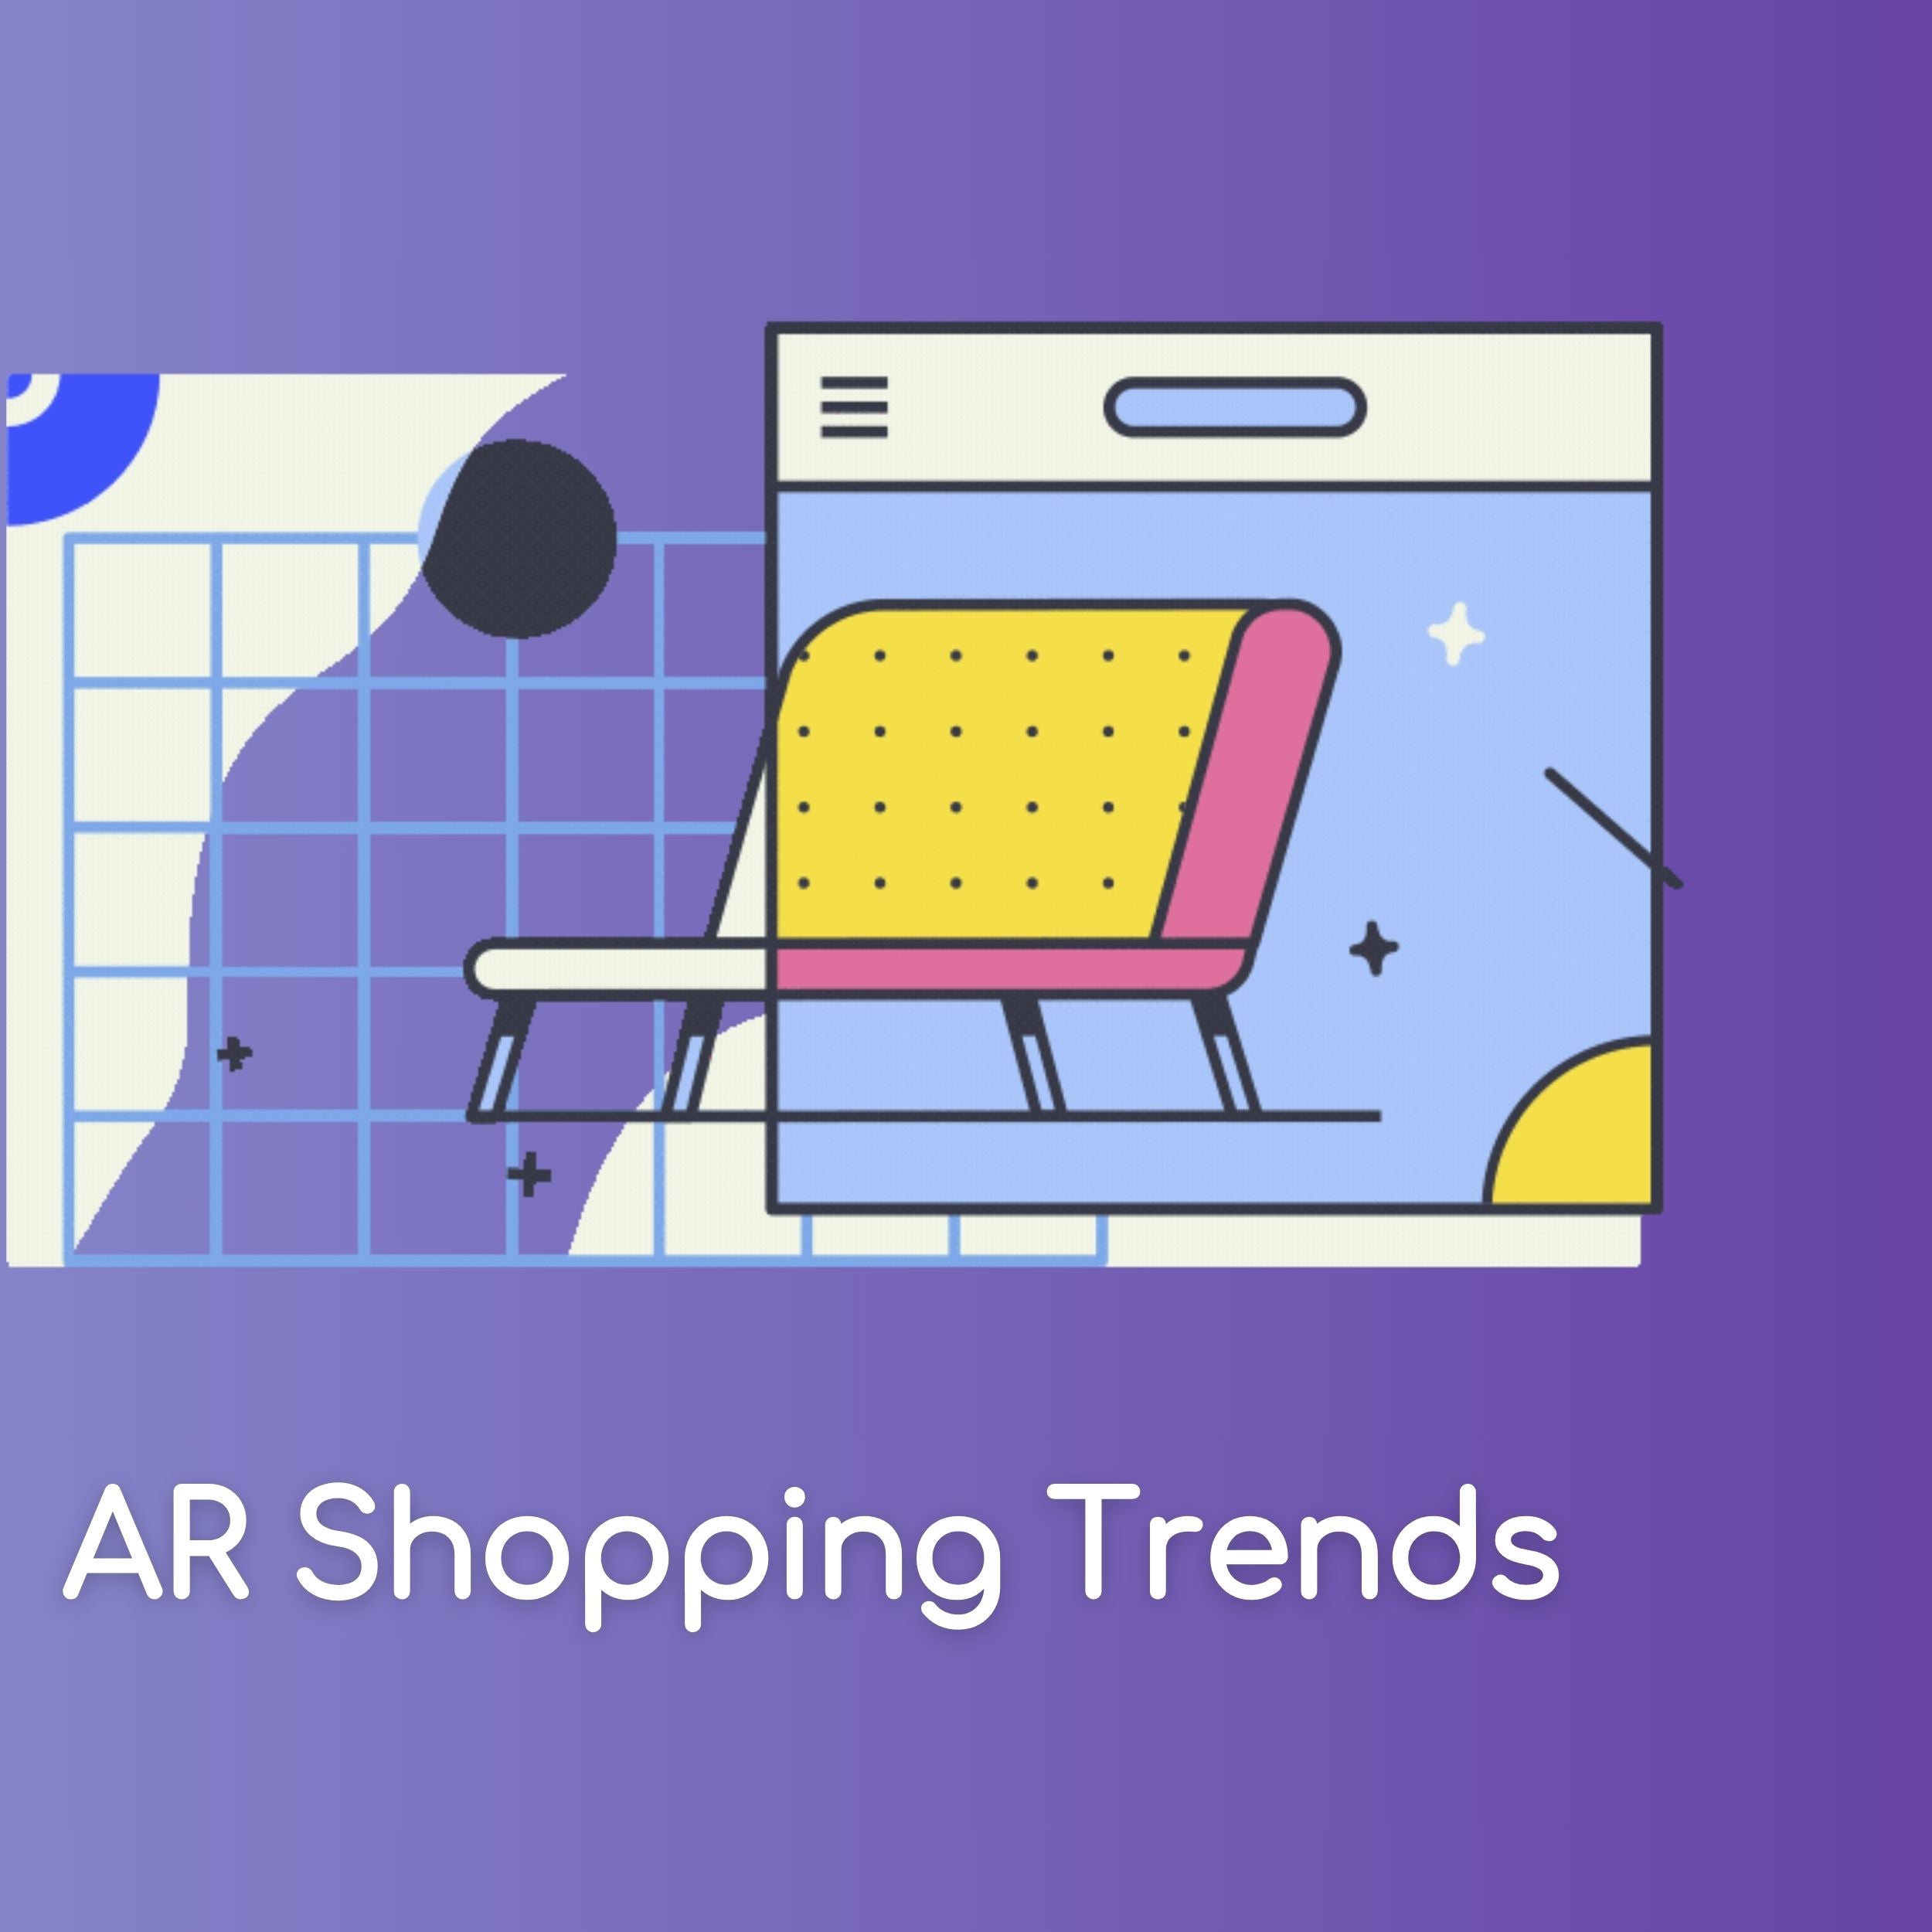 AR Trends ecommerce